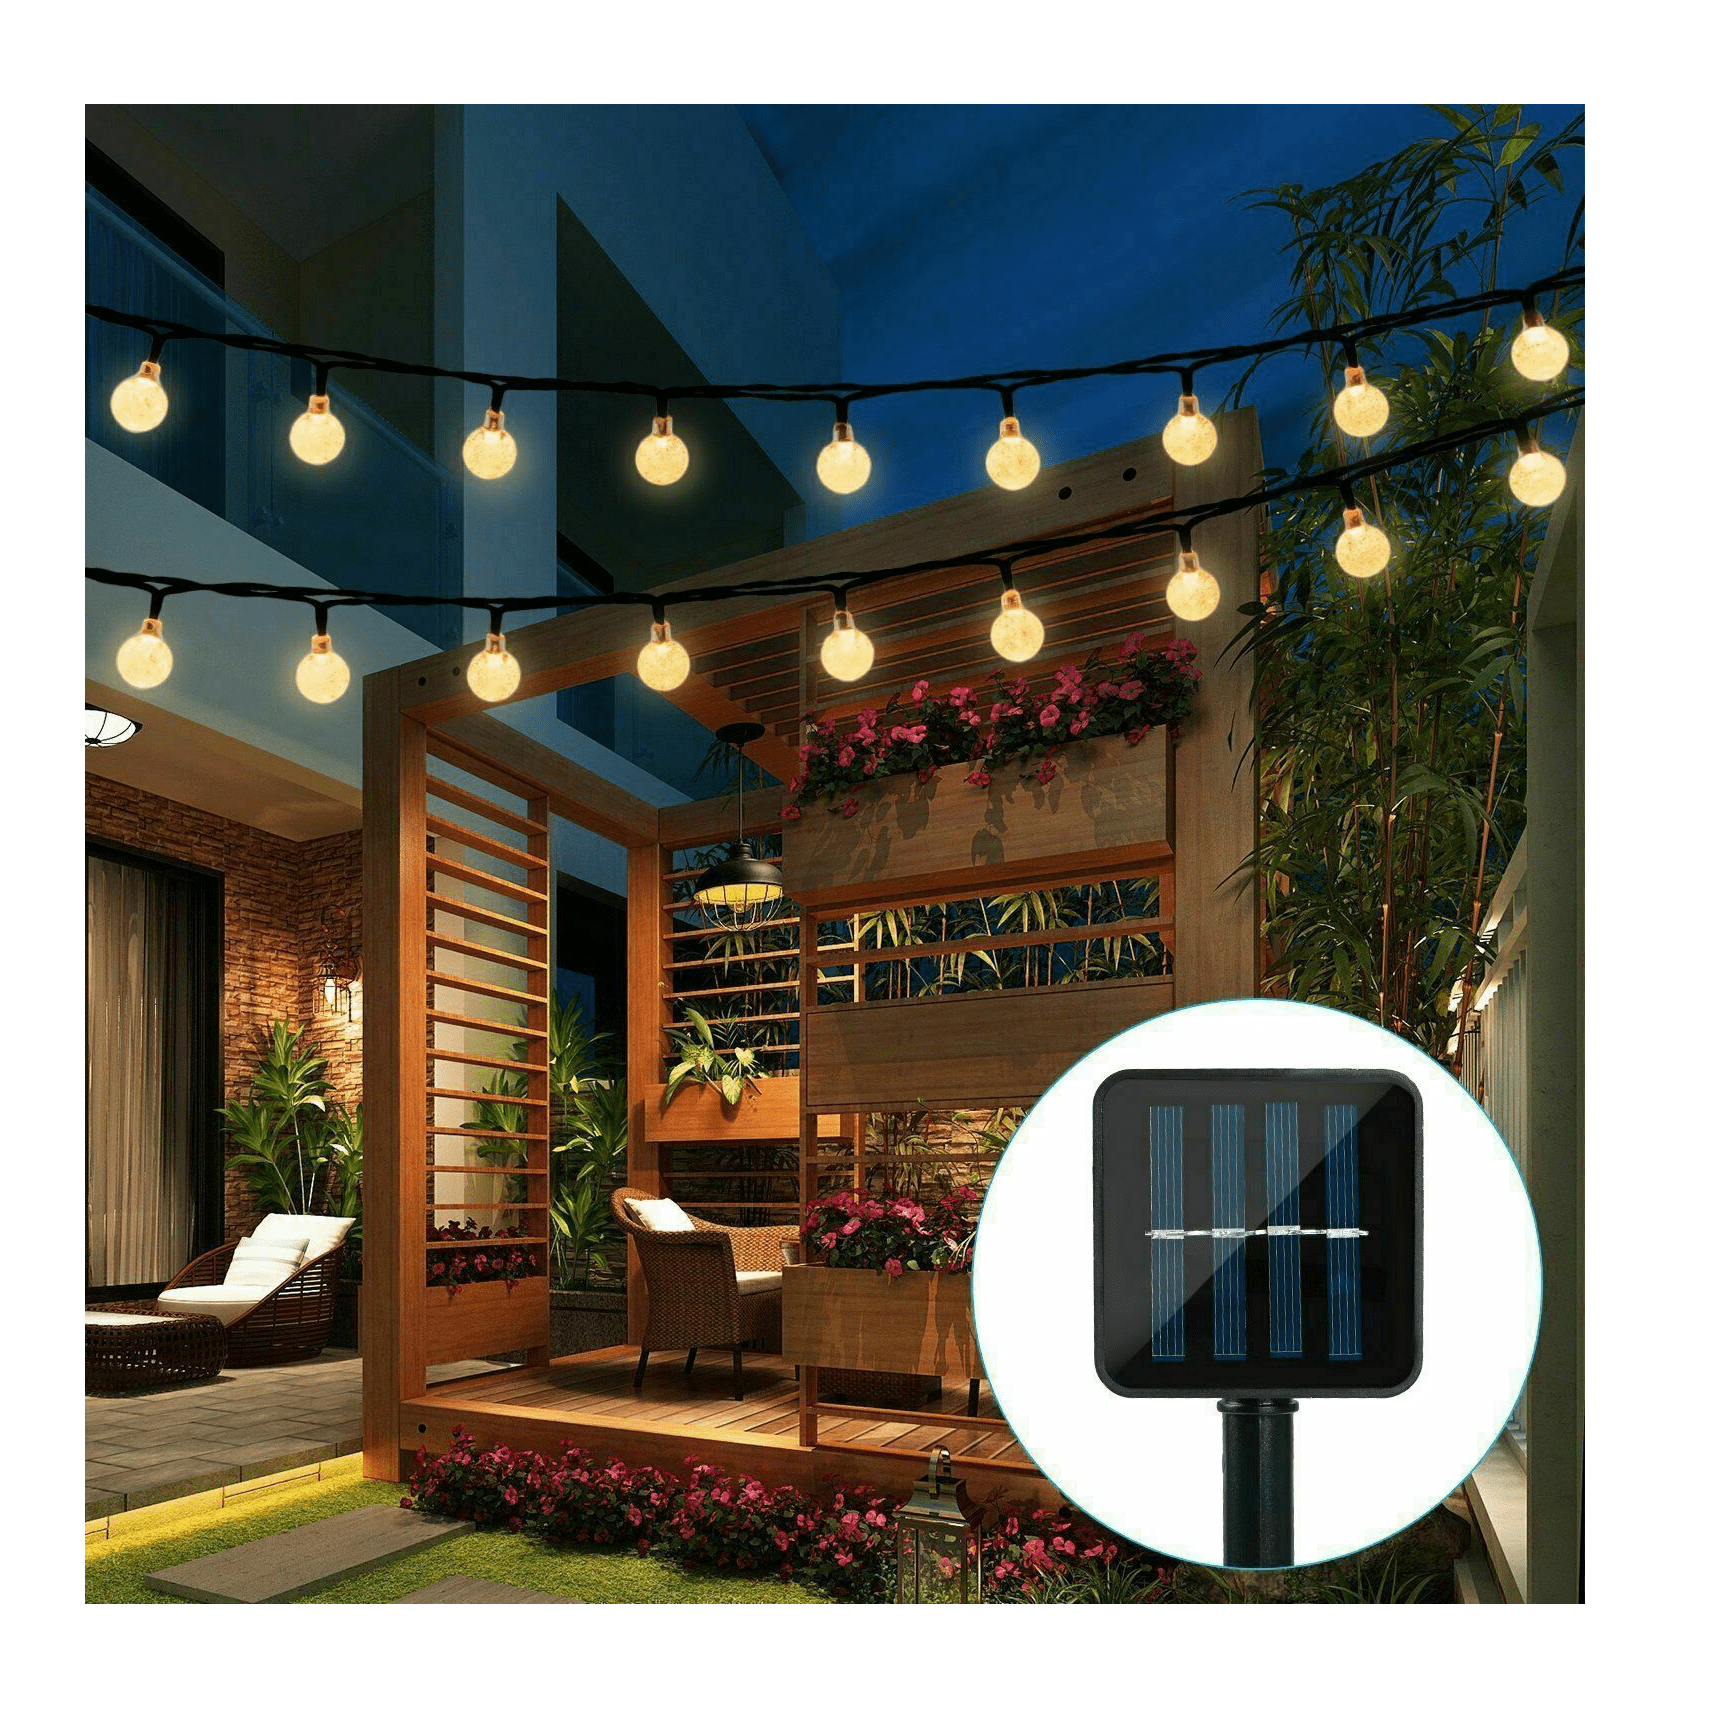 Details about   Solar Powered 30 LED String Light Outdoor Garden Path Yard Waterproof Decor Lamp 